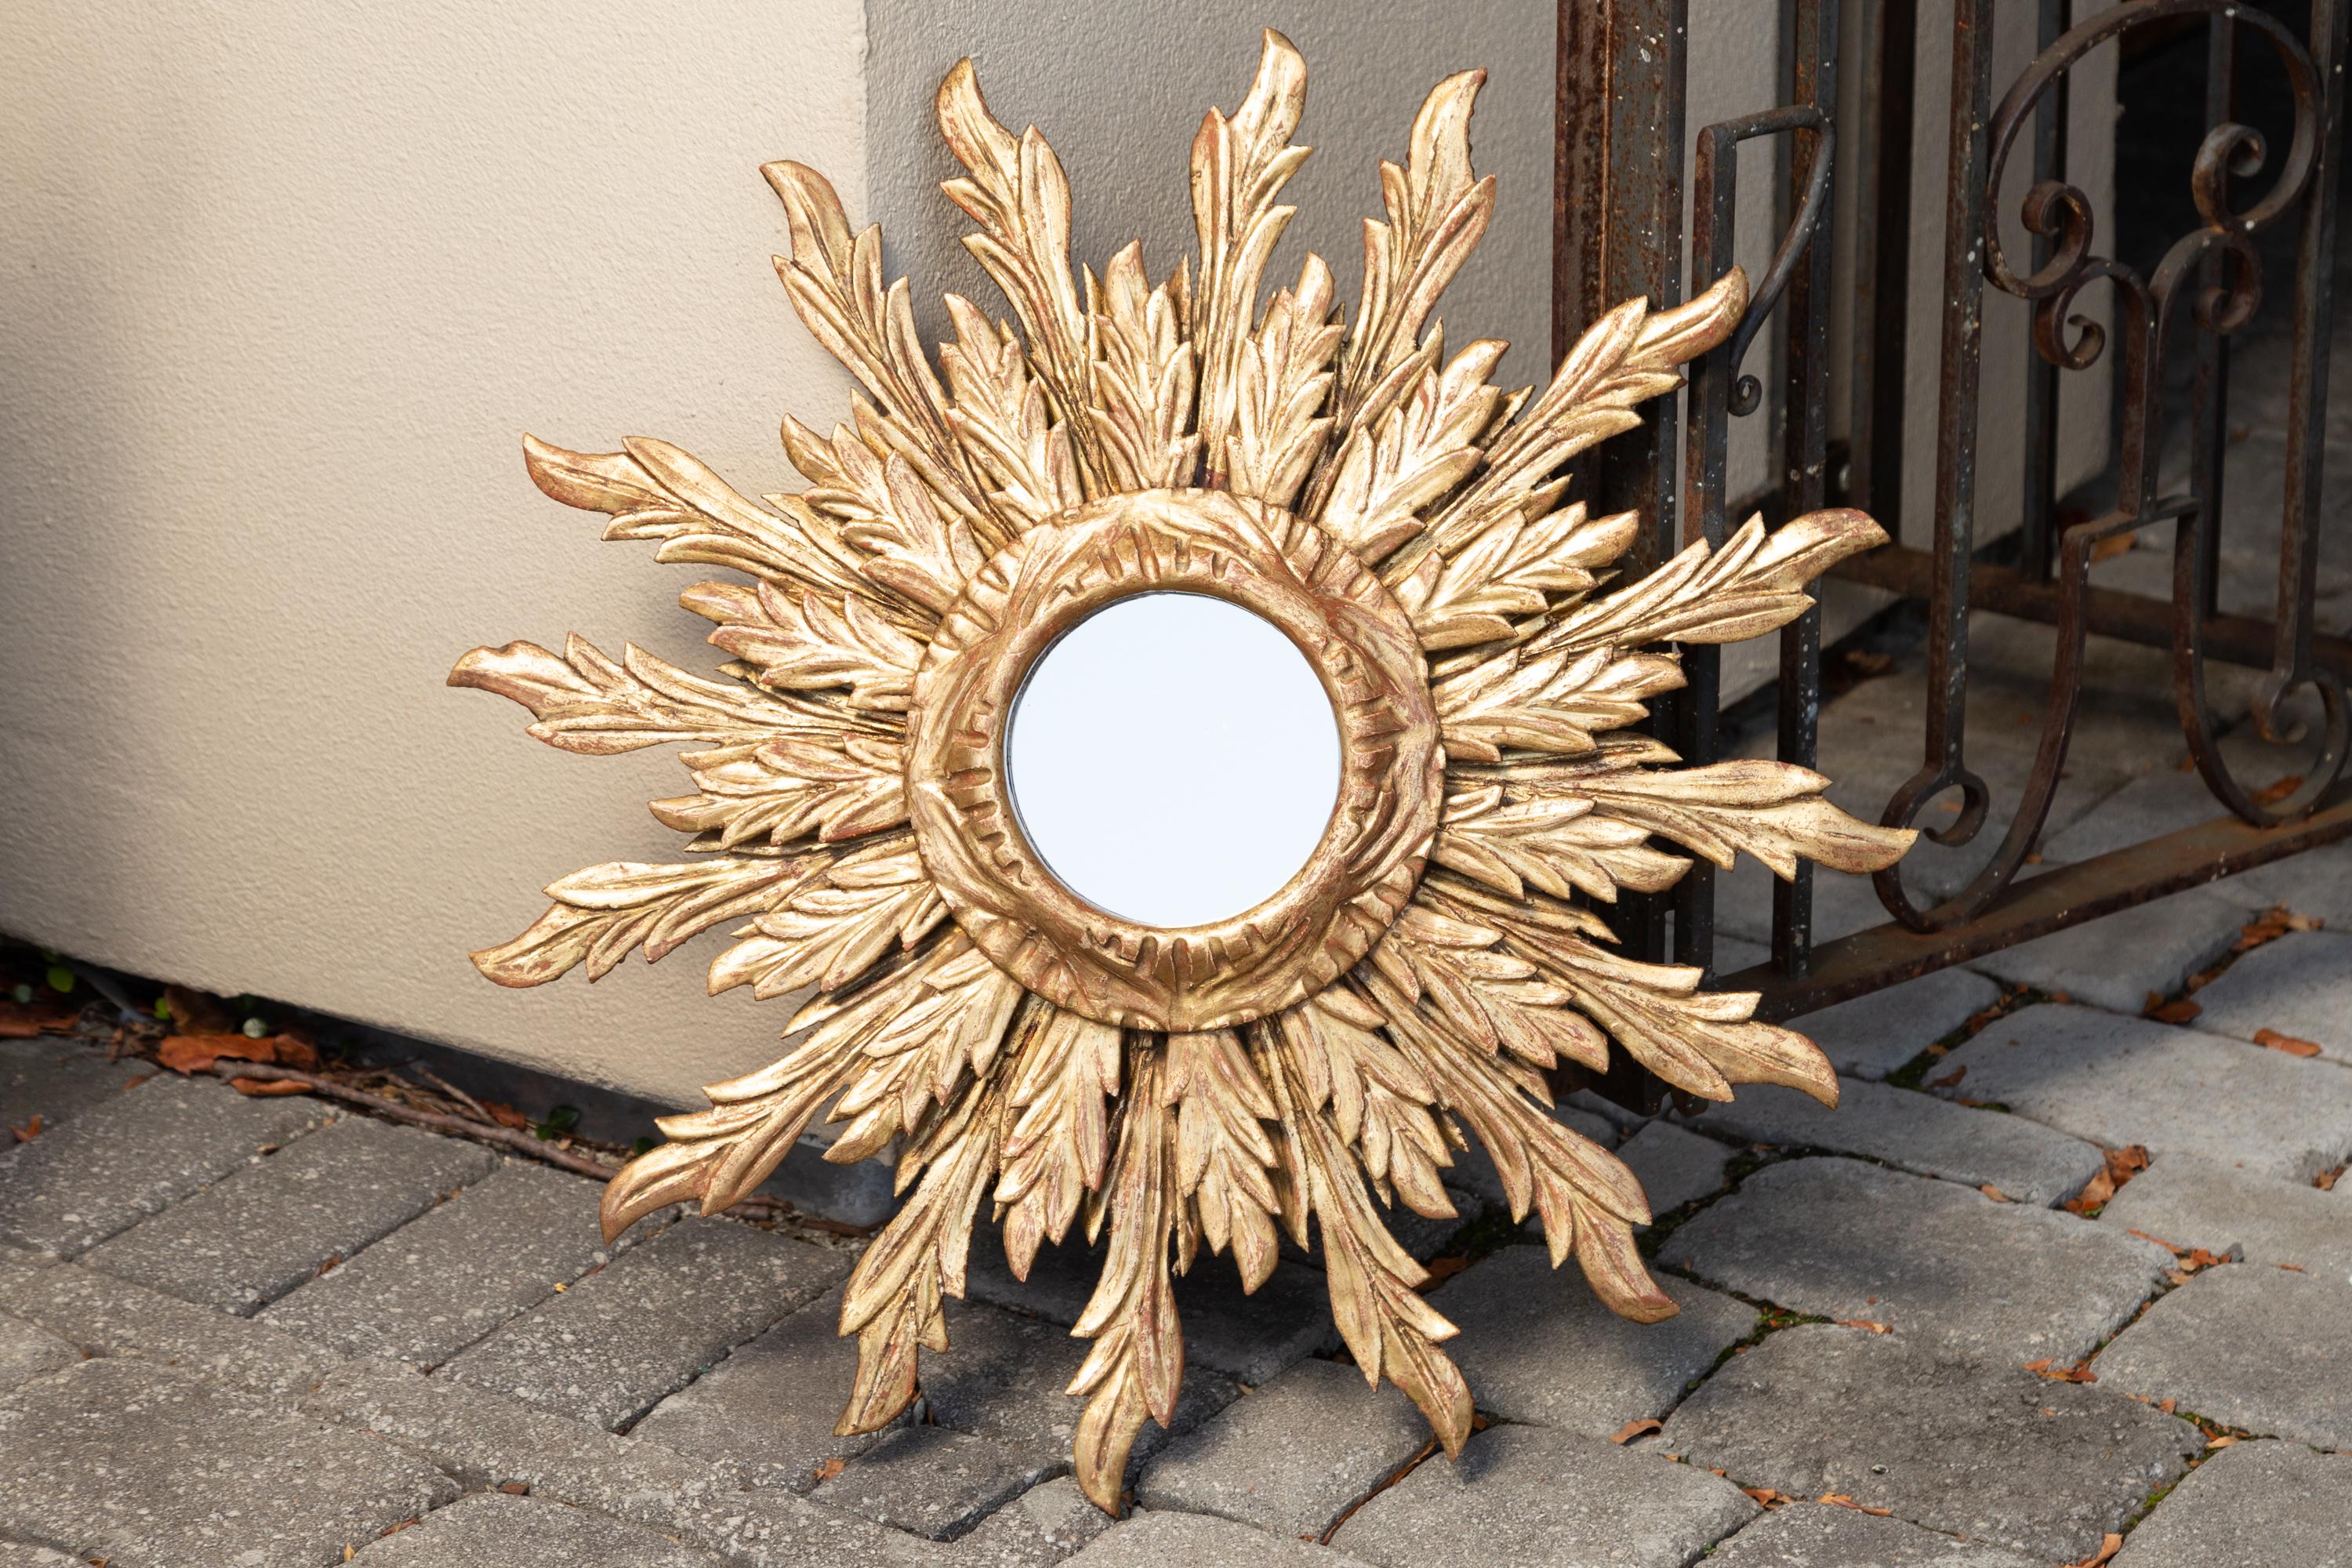 A French giltwood double layered sunburst mirror from the mid-20th century, with wavy sunrays. Born in France during the midcentury period, this exquisite vintage piece features a small size round mirror plate framed by a carved giltwood molding. On